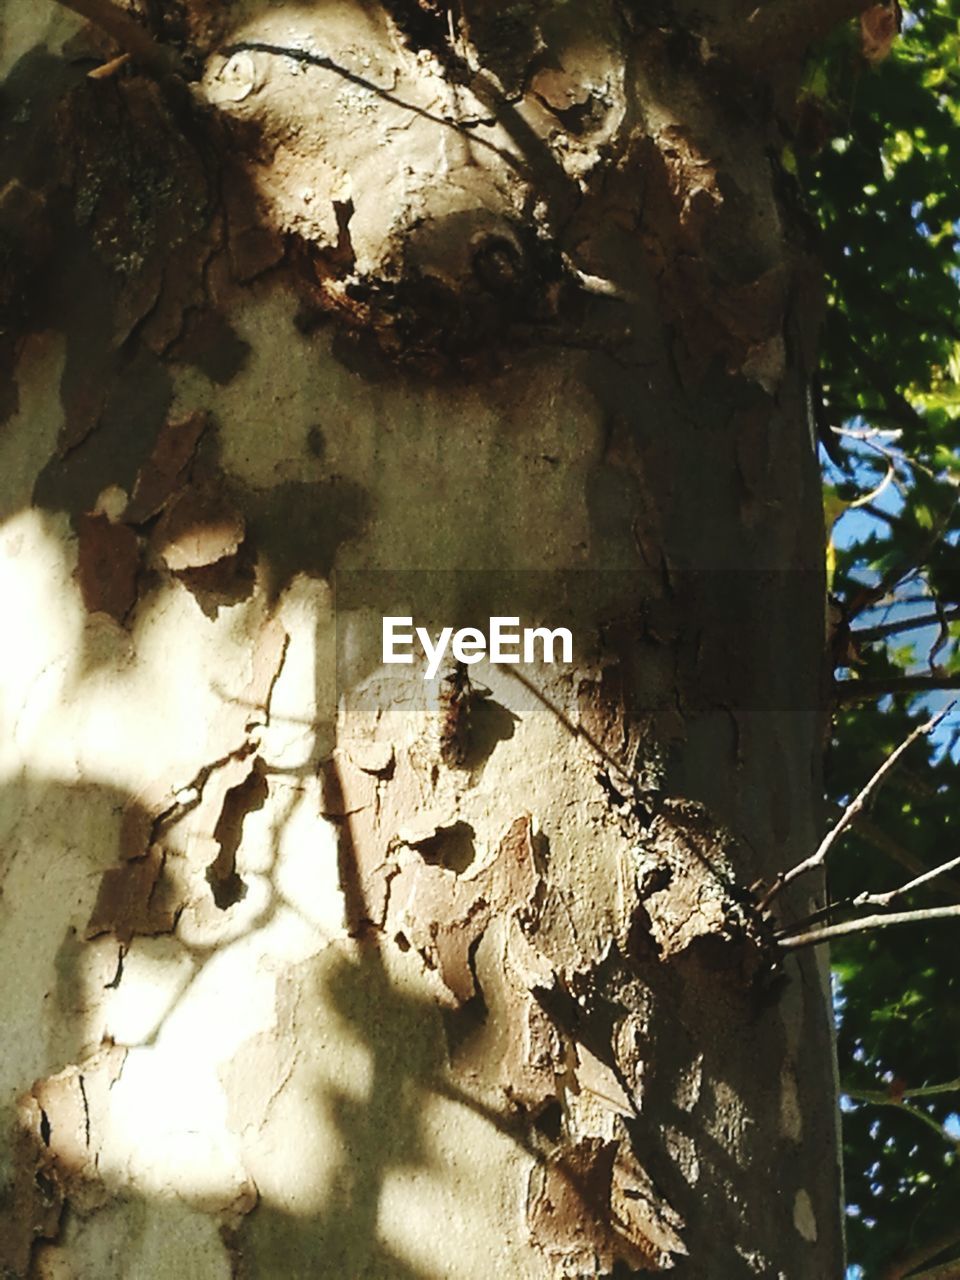 CLOSE-UP VIEW OF TREE TRUNK